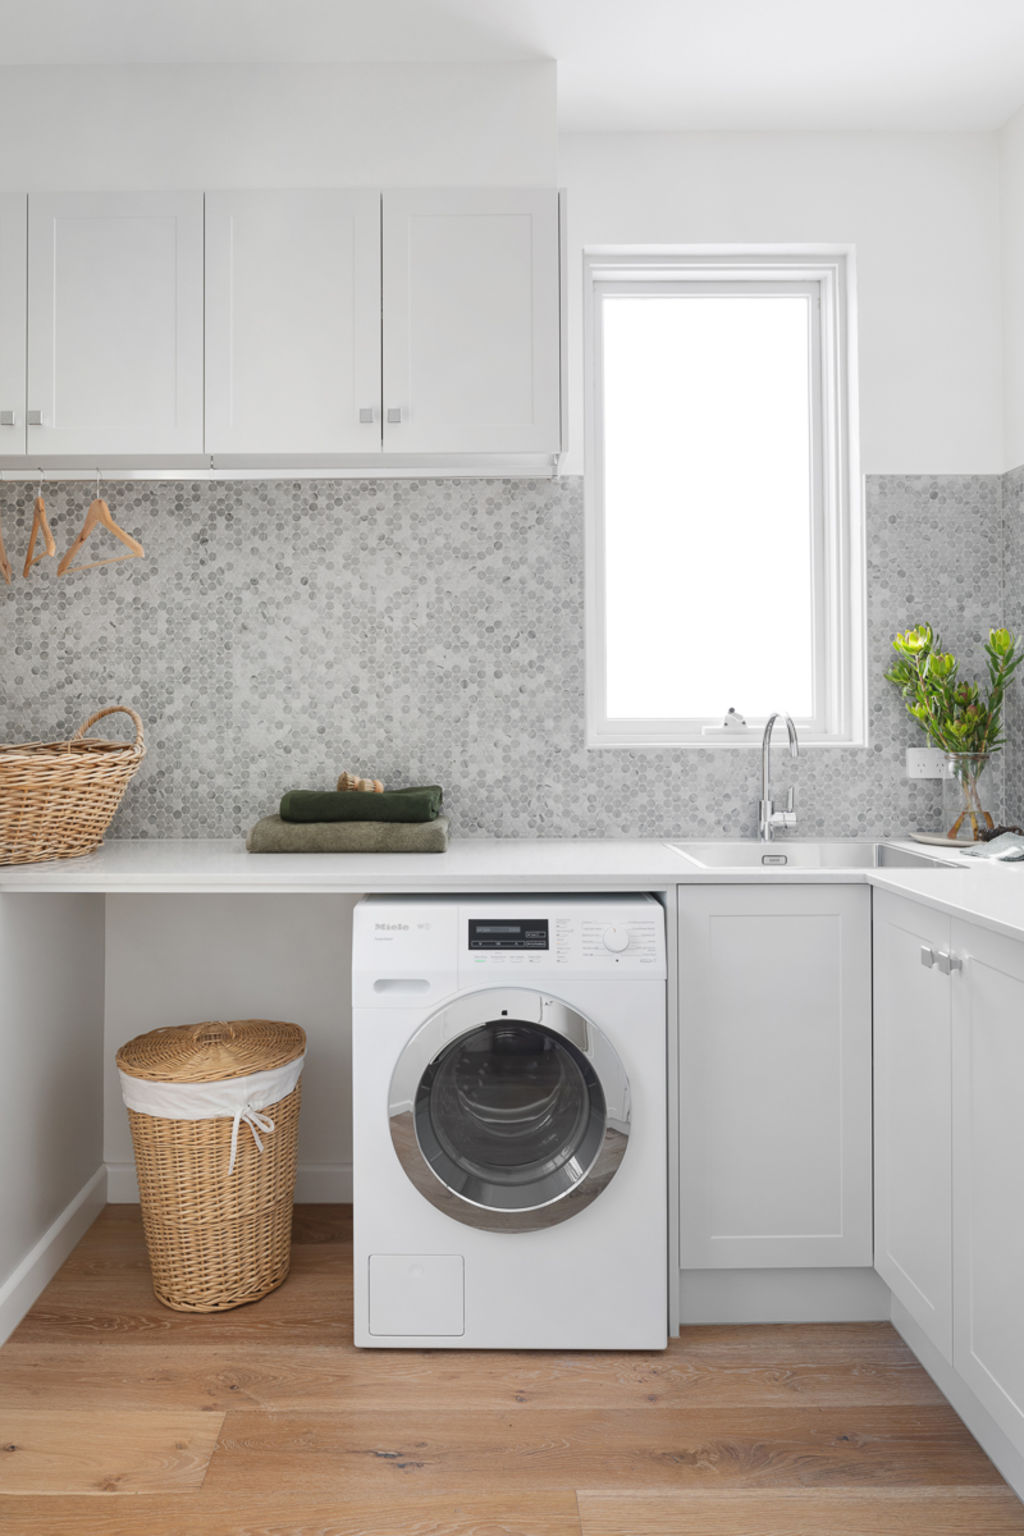 'Laundries are the unsung heroes of our homes,' says designer Martine Cooper Photo: Martine Cooper